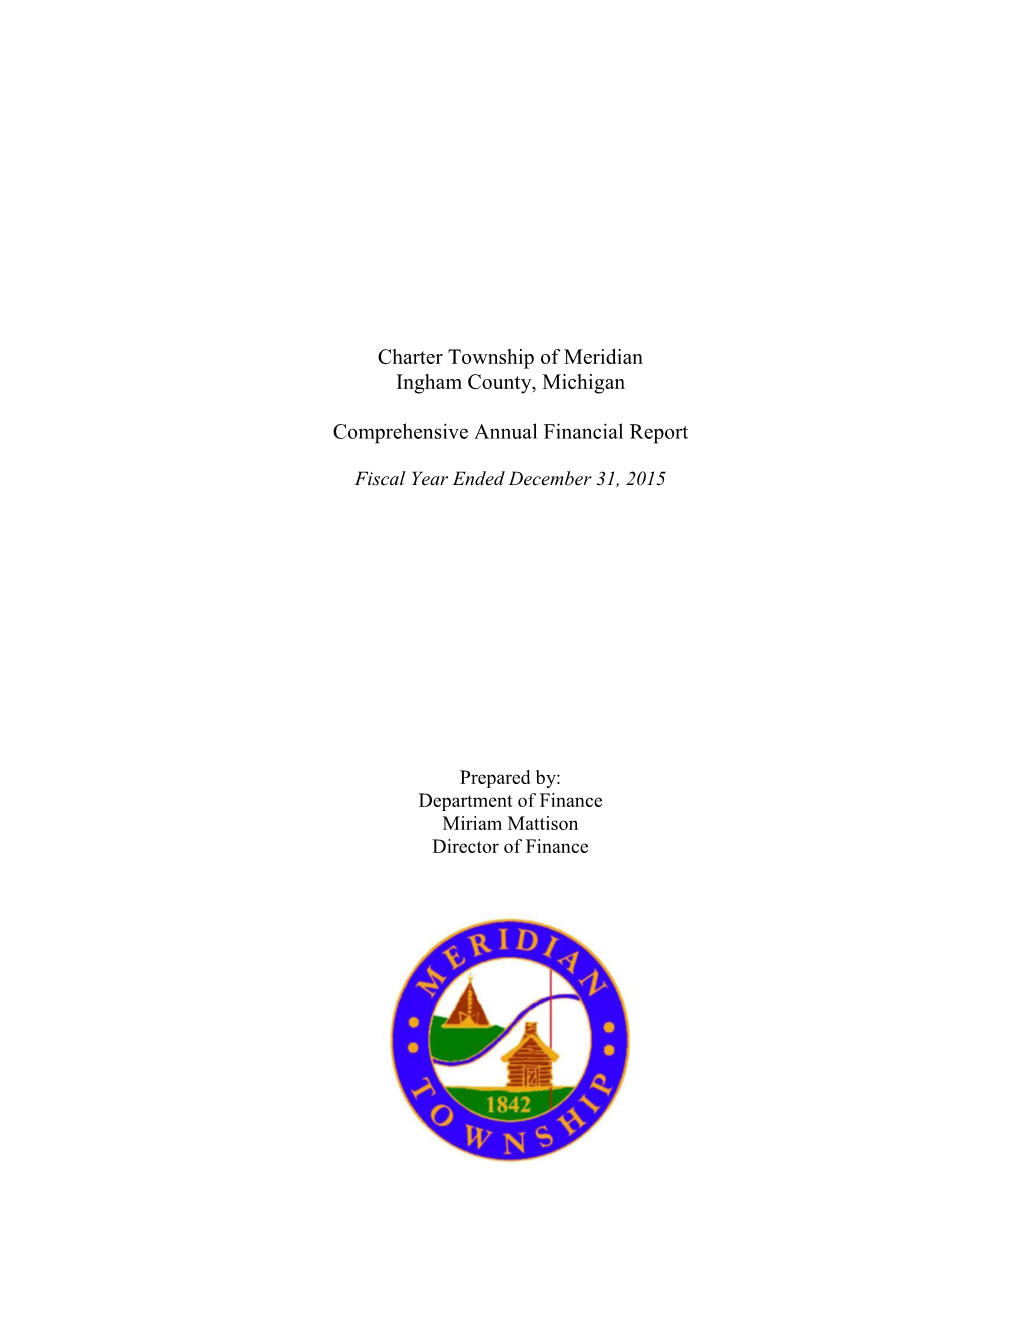 Charter Township of Meridian Ingham County, Michigan Comprehensive Annual Financial Report